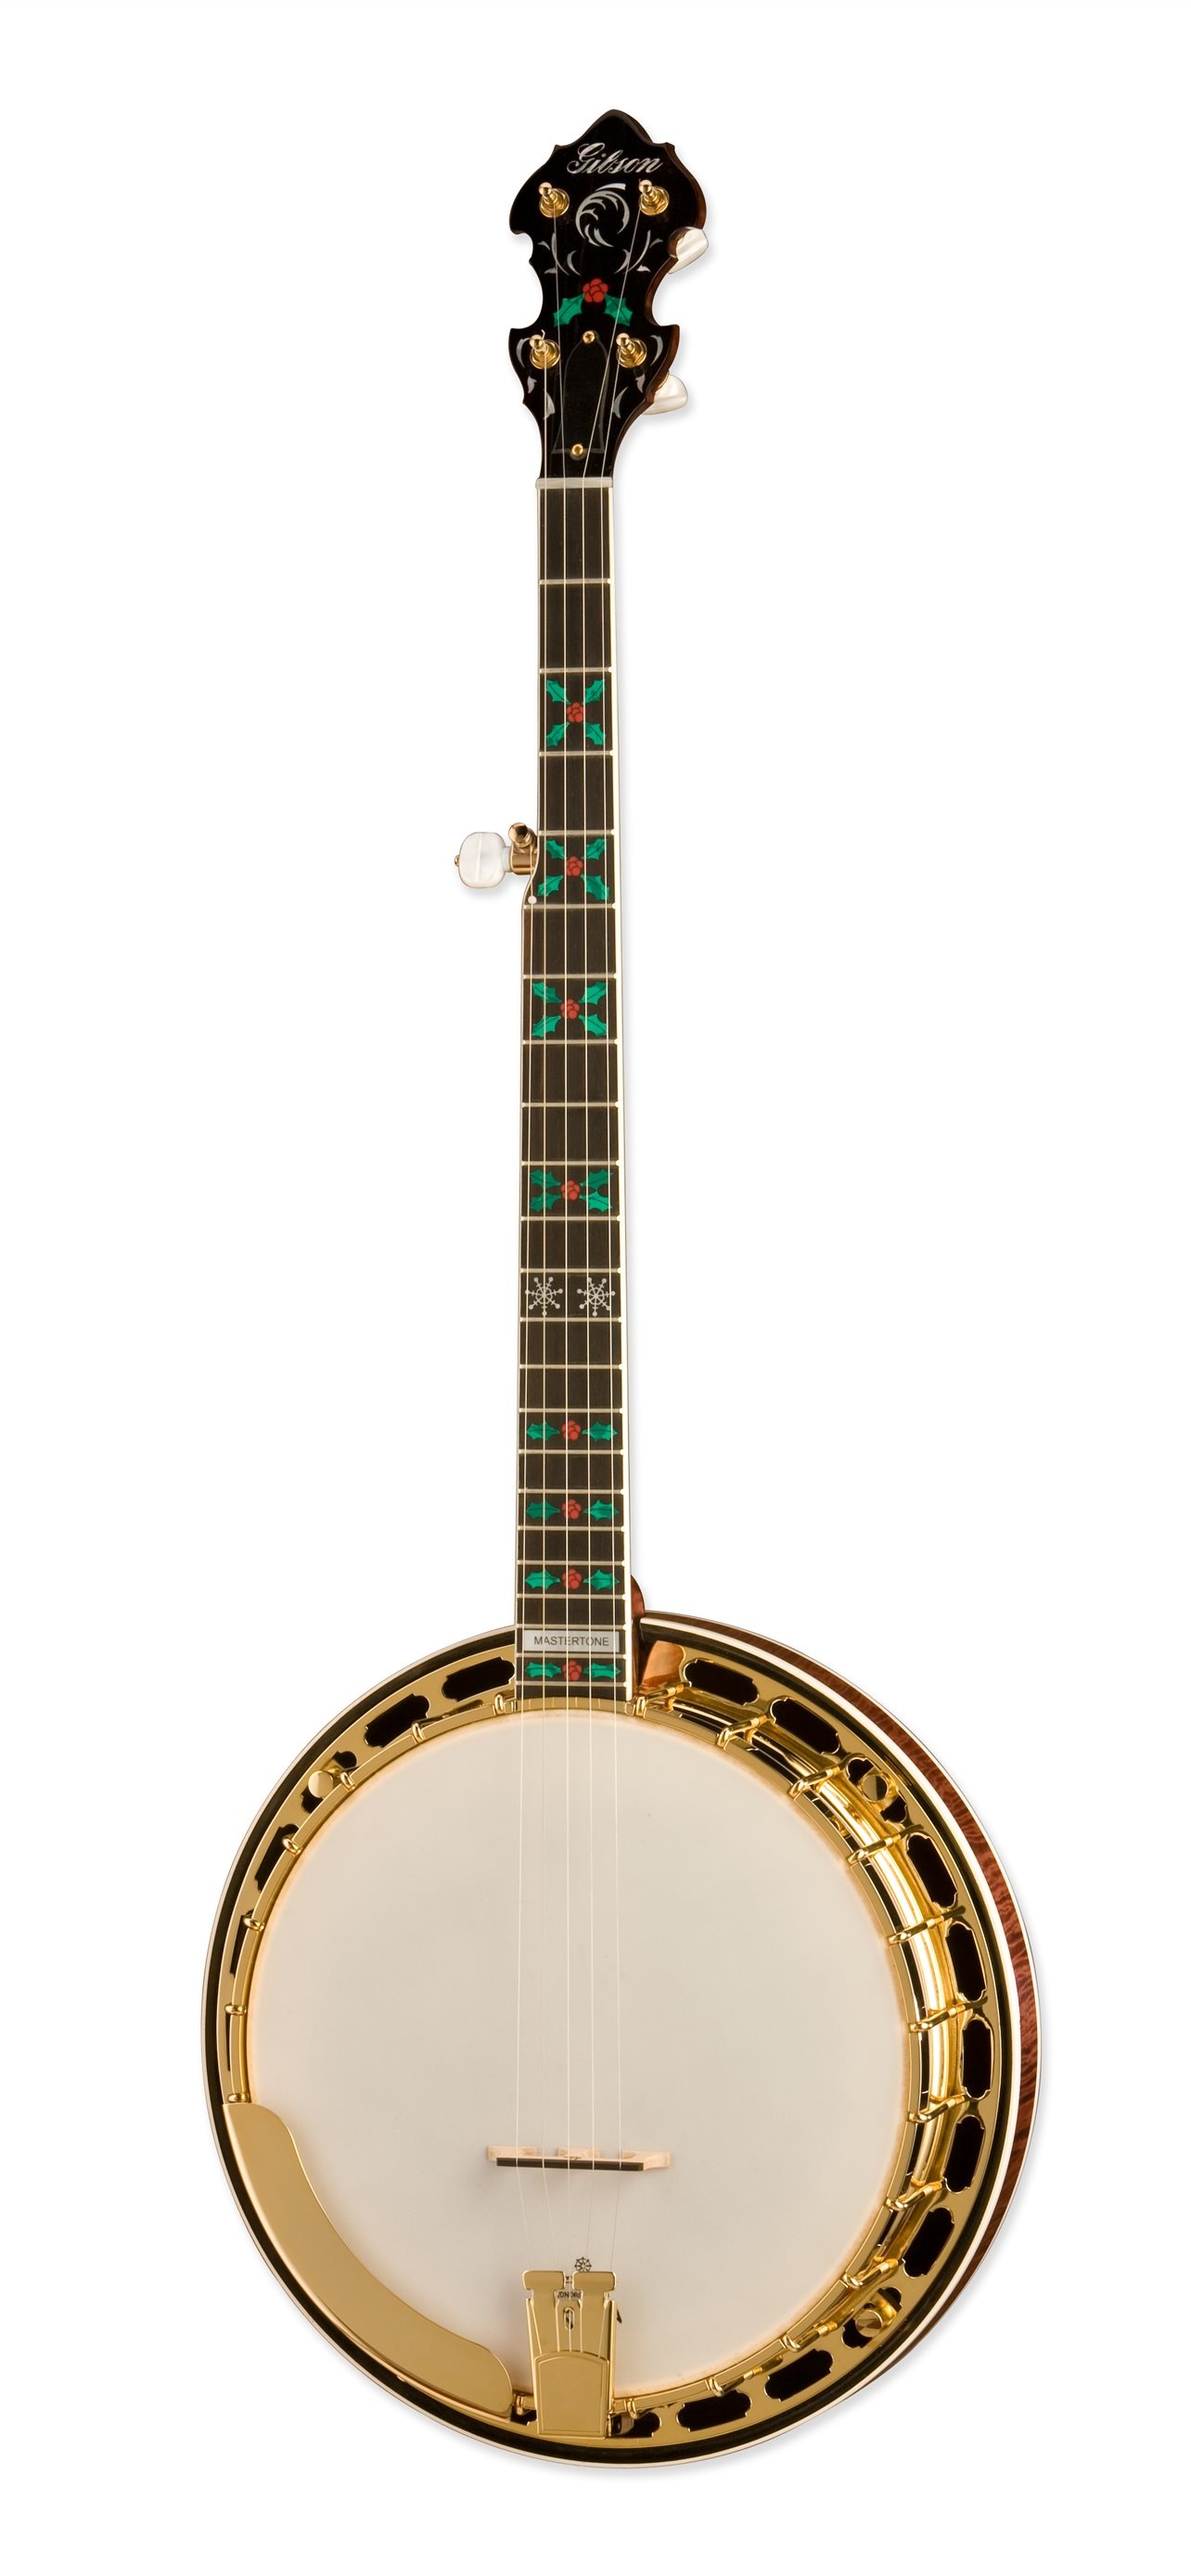 Banjo: A stringed musical instrument with a long neck and a hollow circular body. 1290x2780 HD Wallpaper.